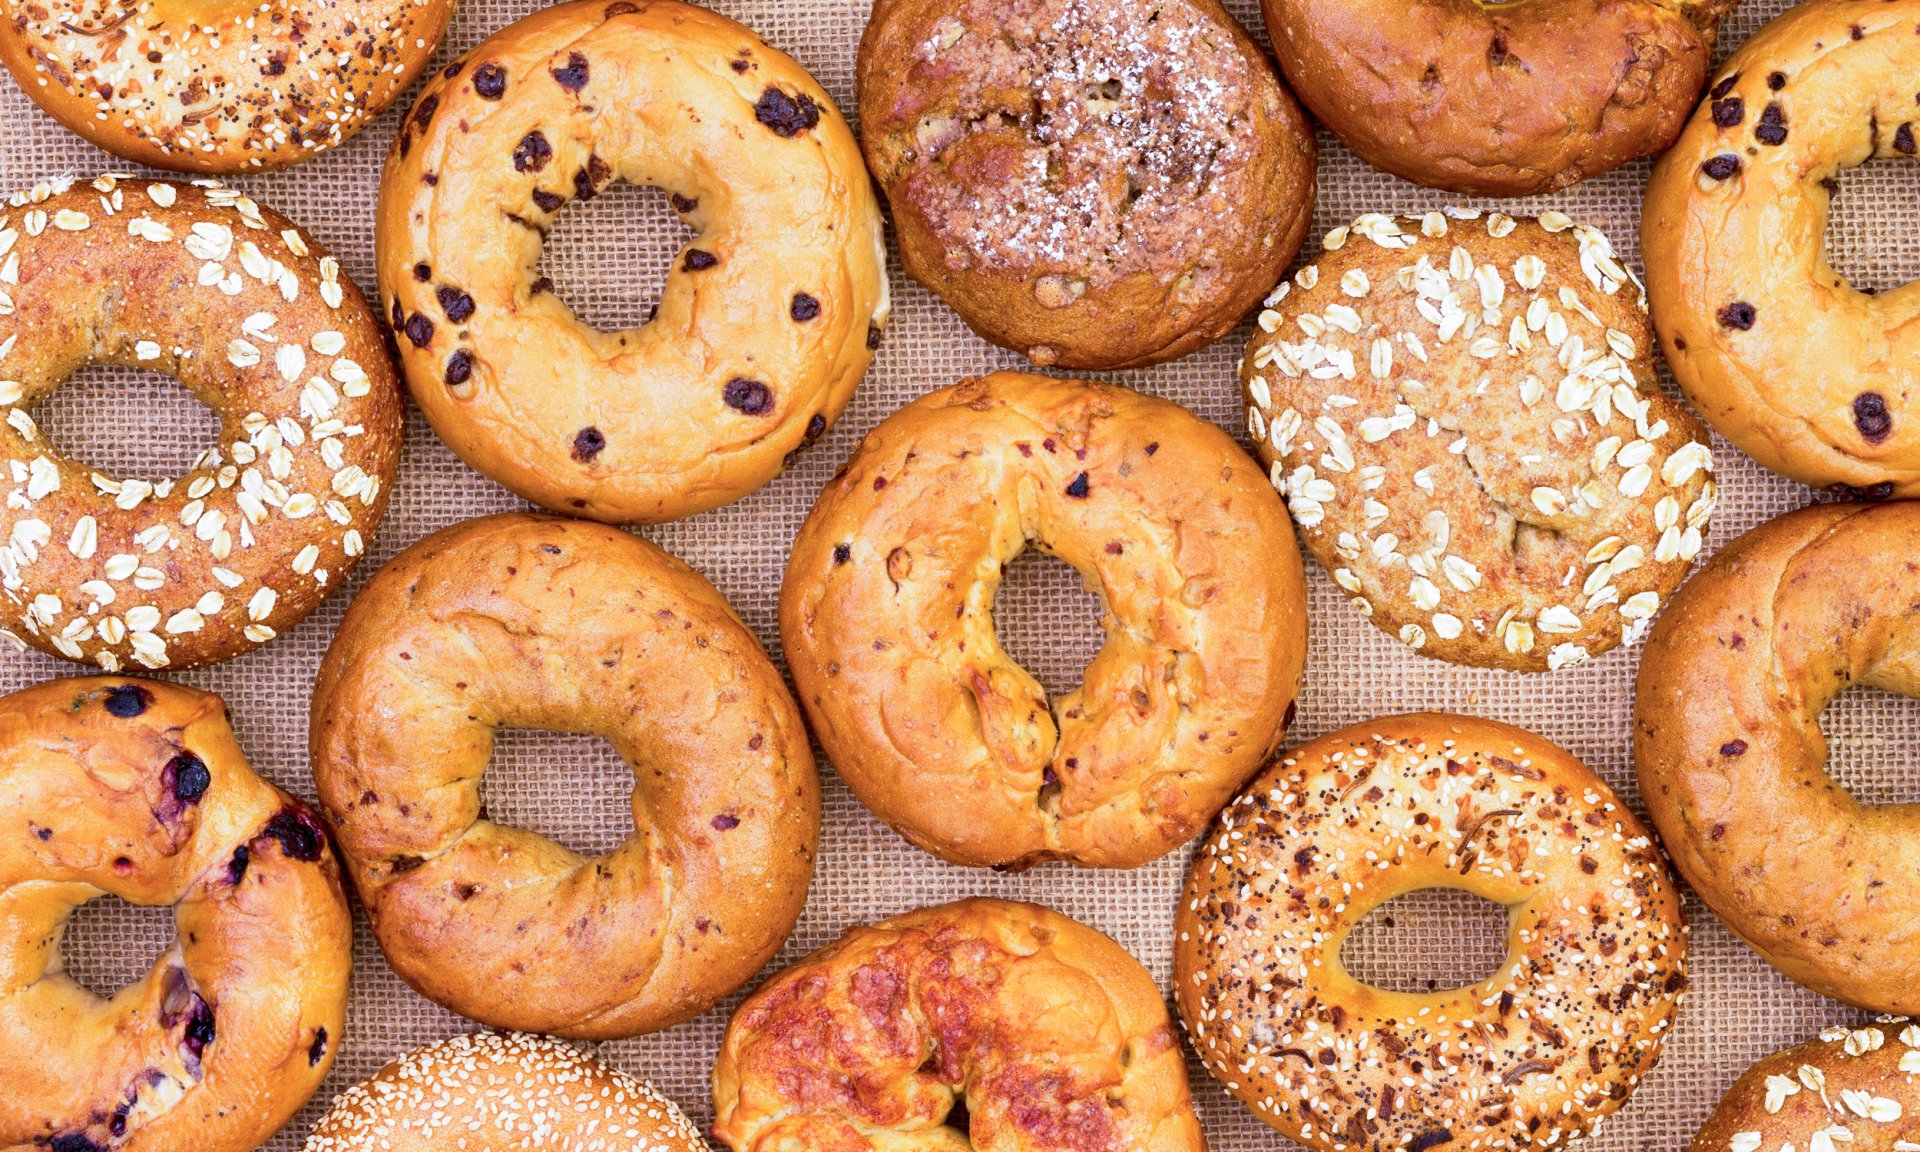 Photo of all different types of bagels on a tray.